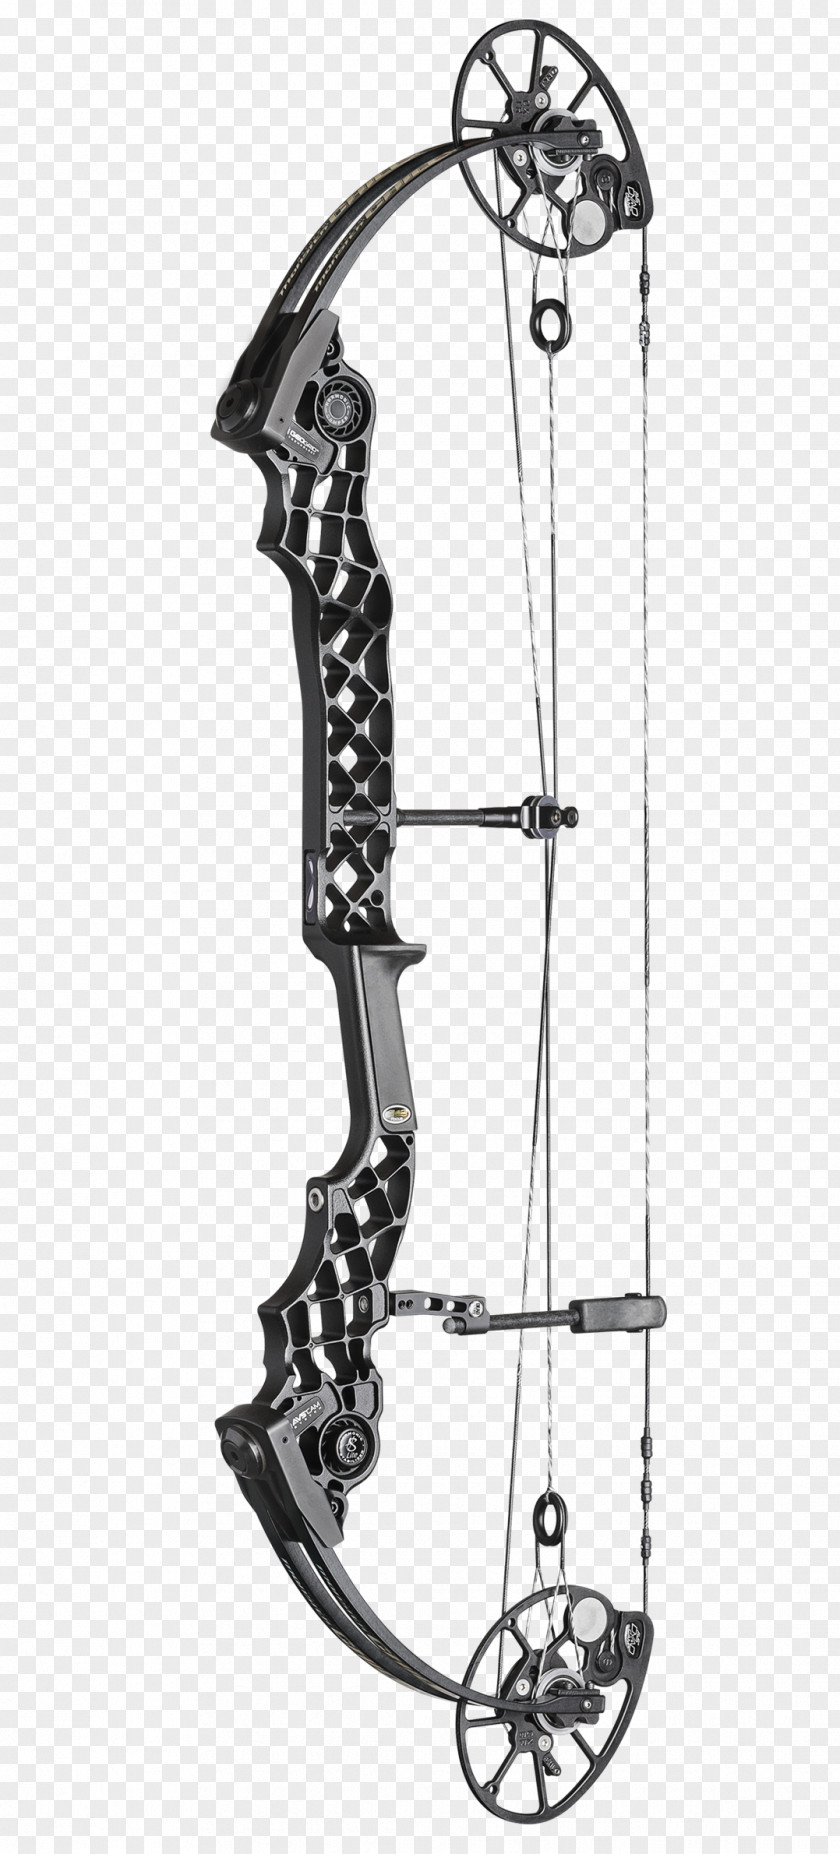 Samick Archery Equipment Compound Bows Bow And Arrow Bowhunting PNG